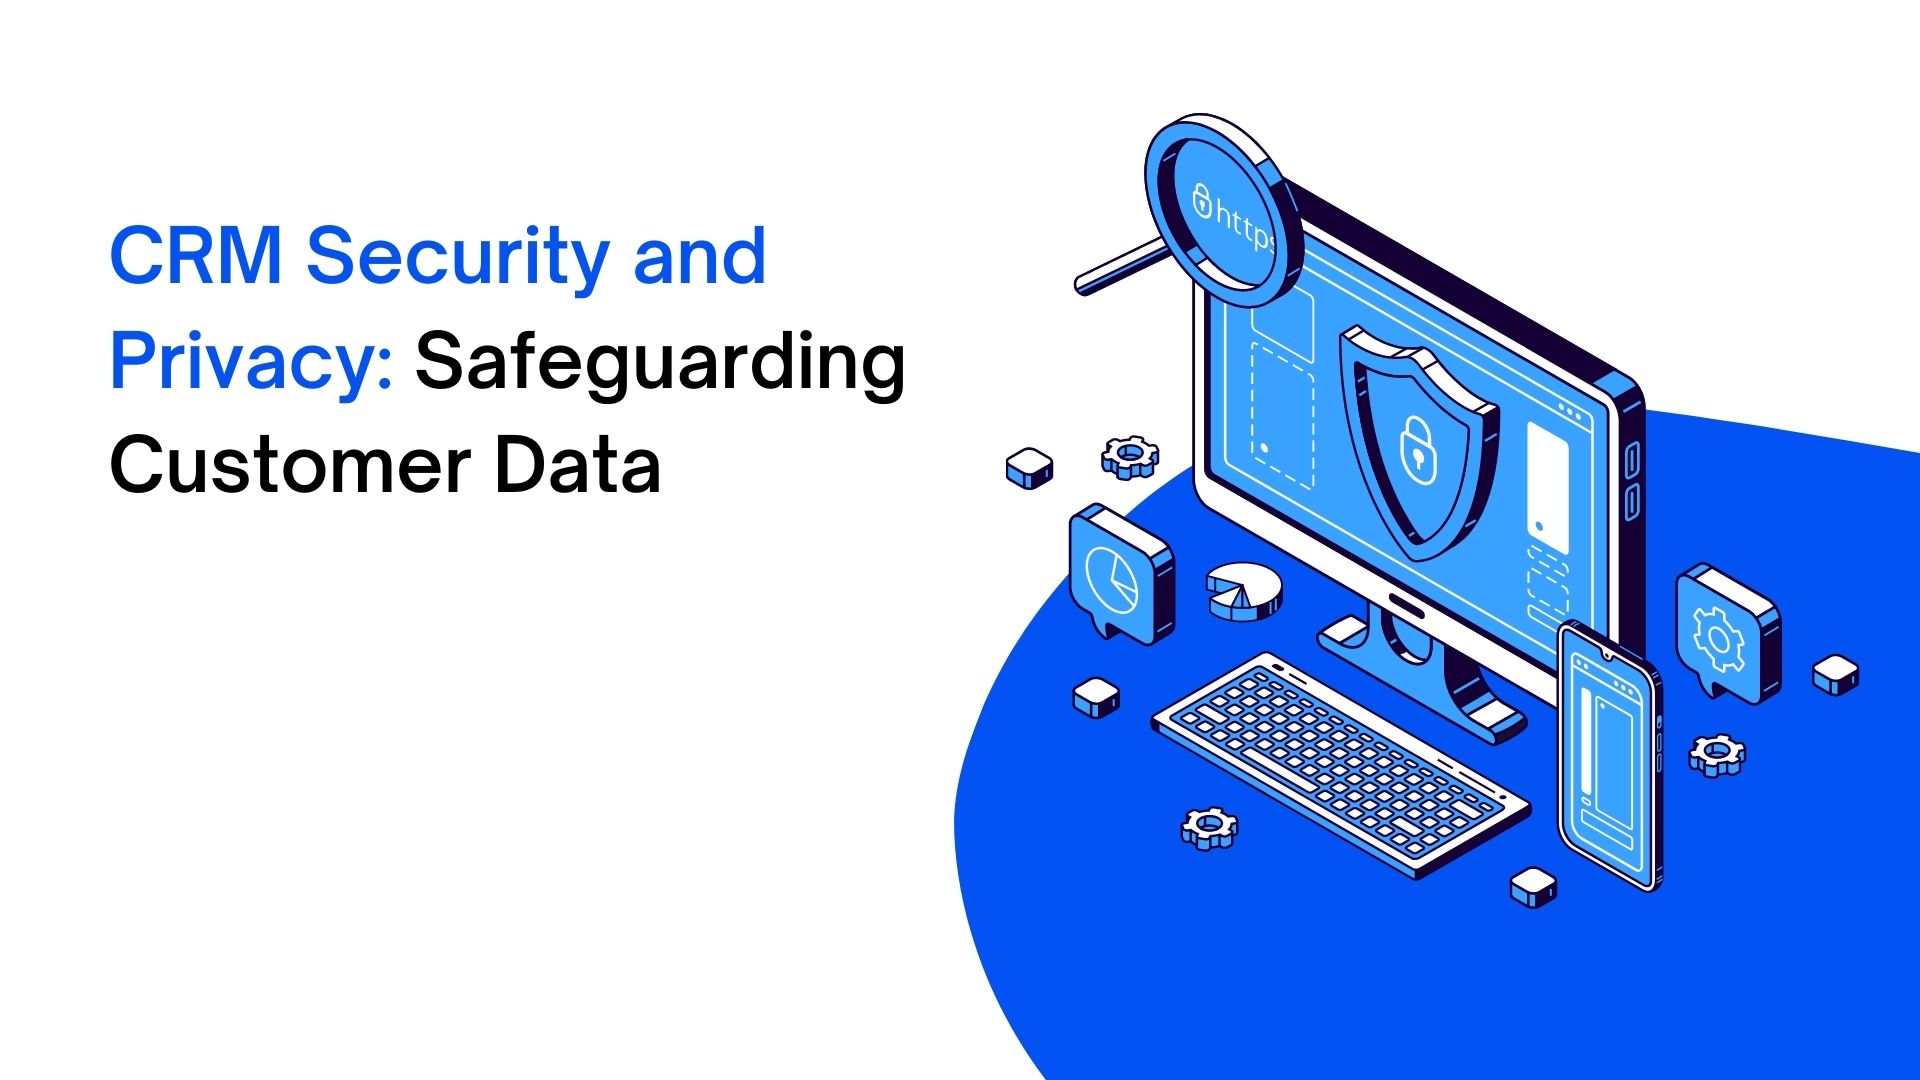 CRM Security and Privacy: Safeguarding Customer Data